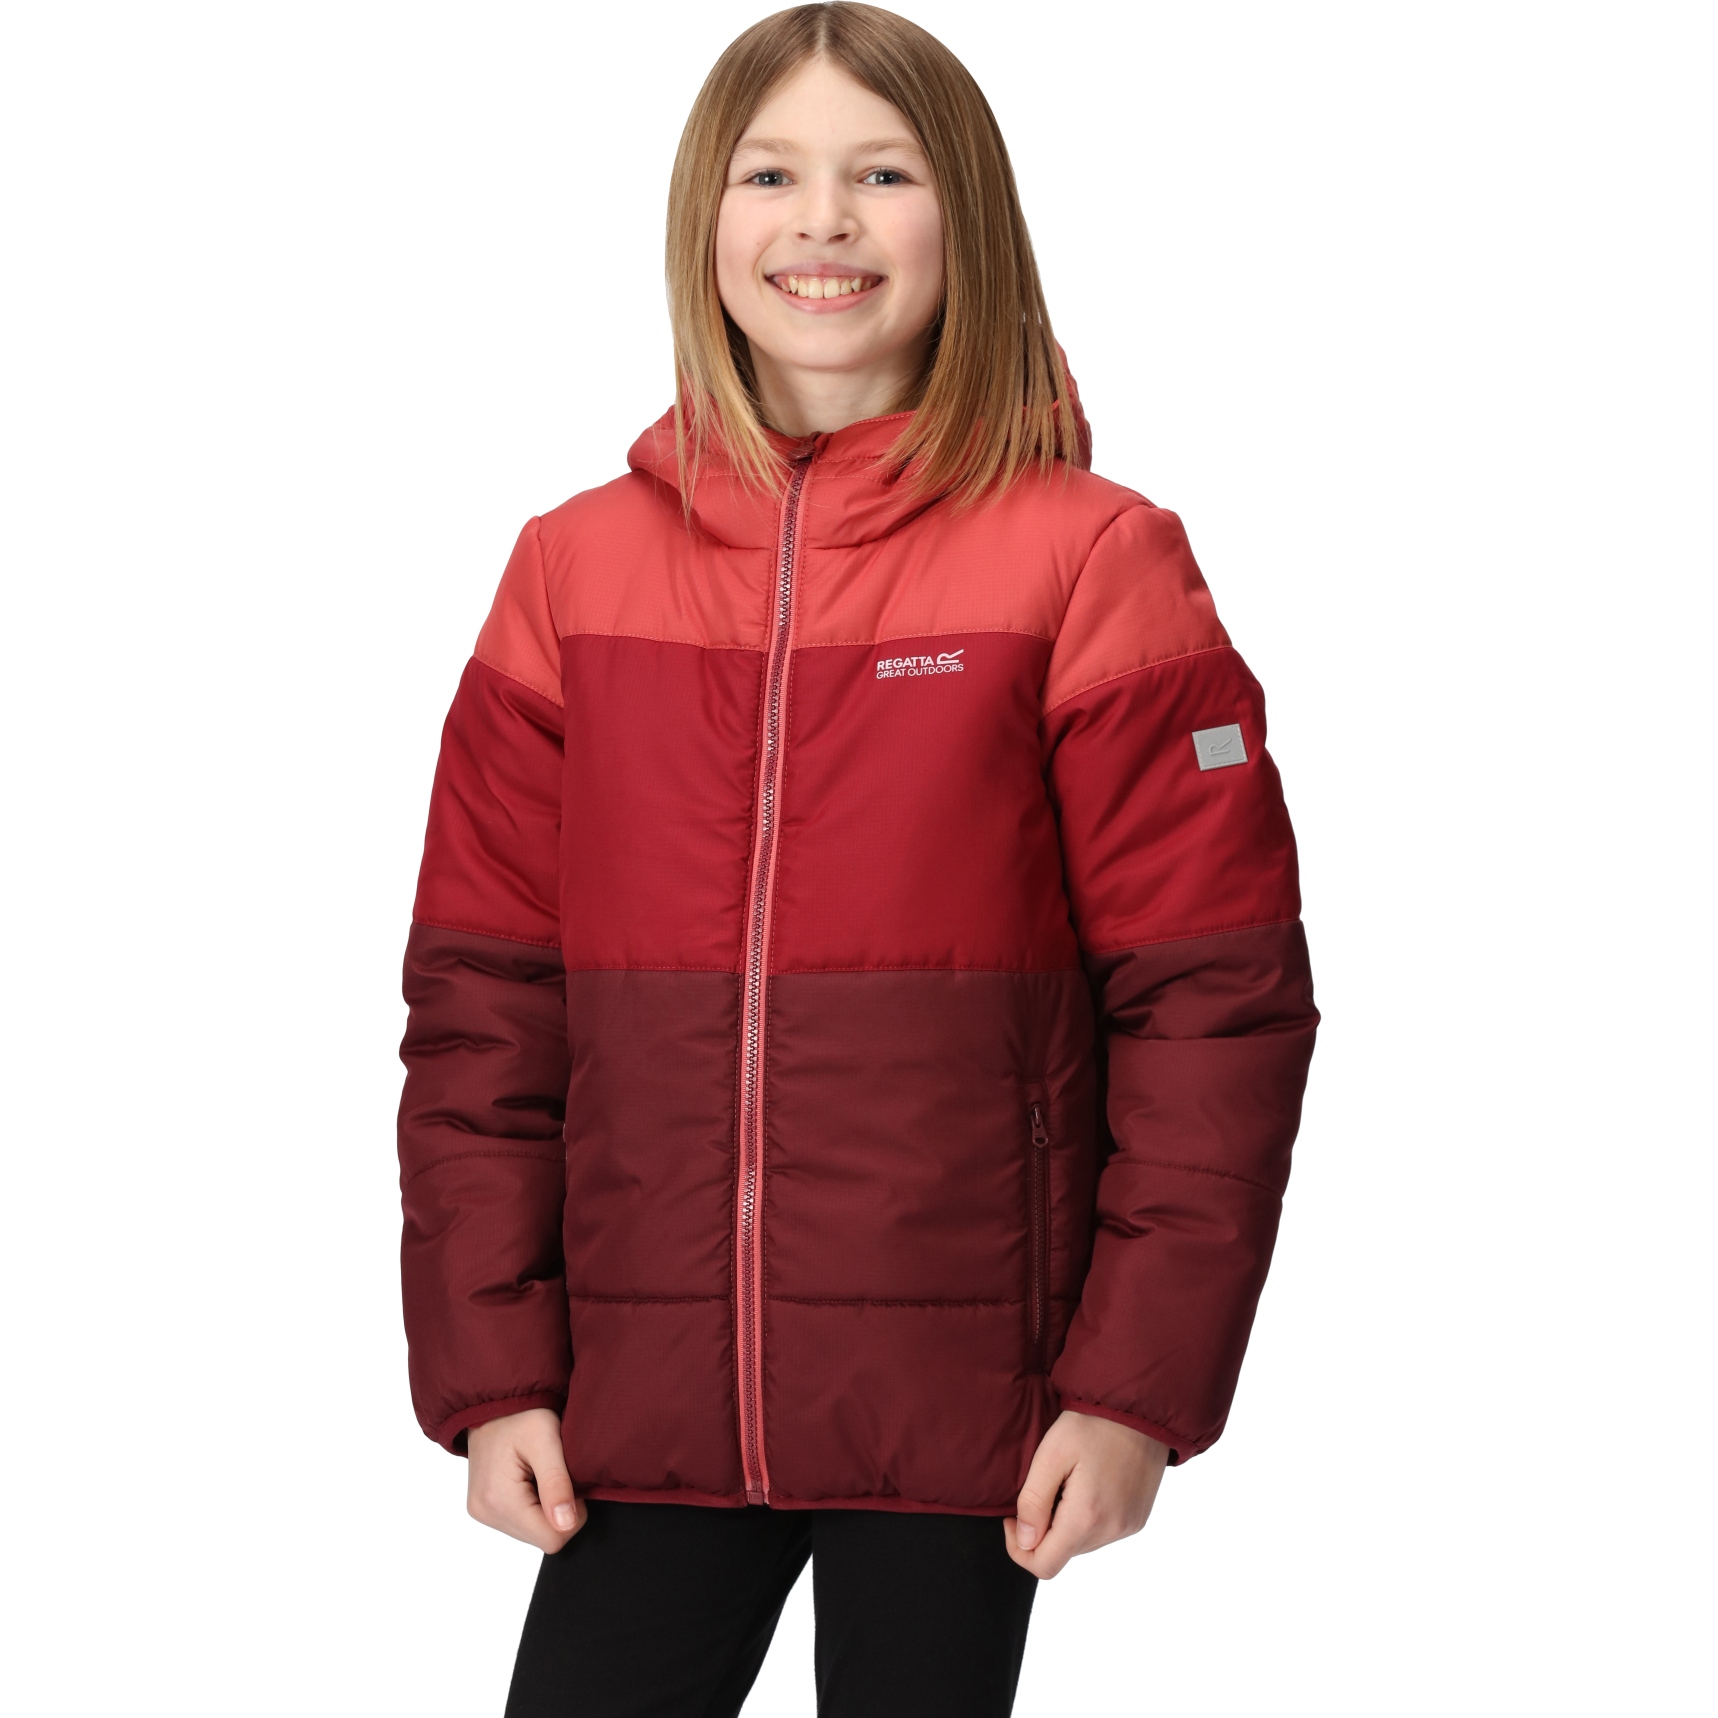 Picture of Regatta Lofthouse VII Jacket Kids - Mineral Red/Rumba Red/Apricot Crush X8Z